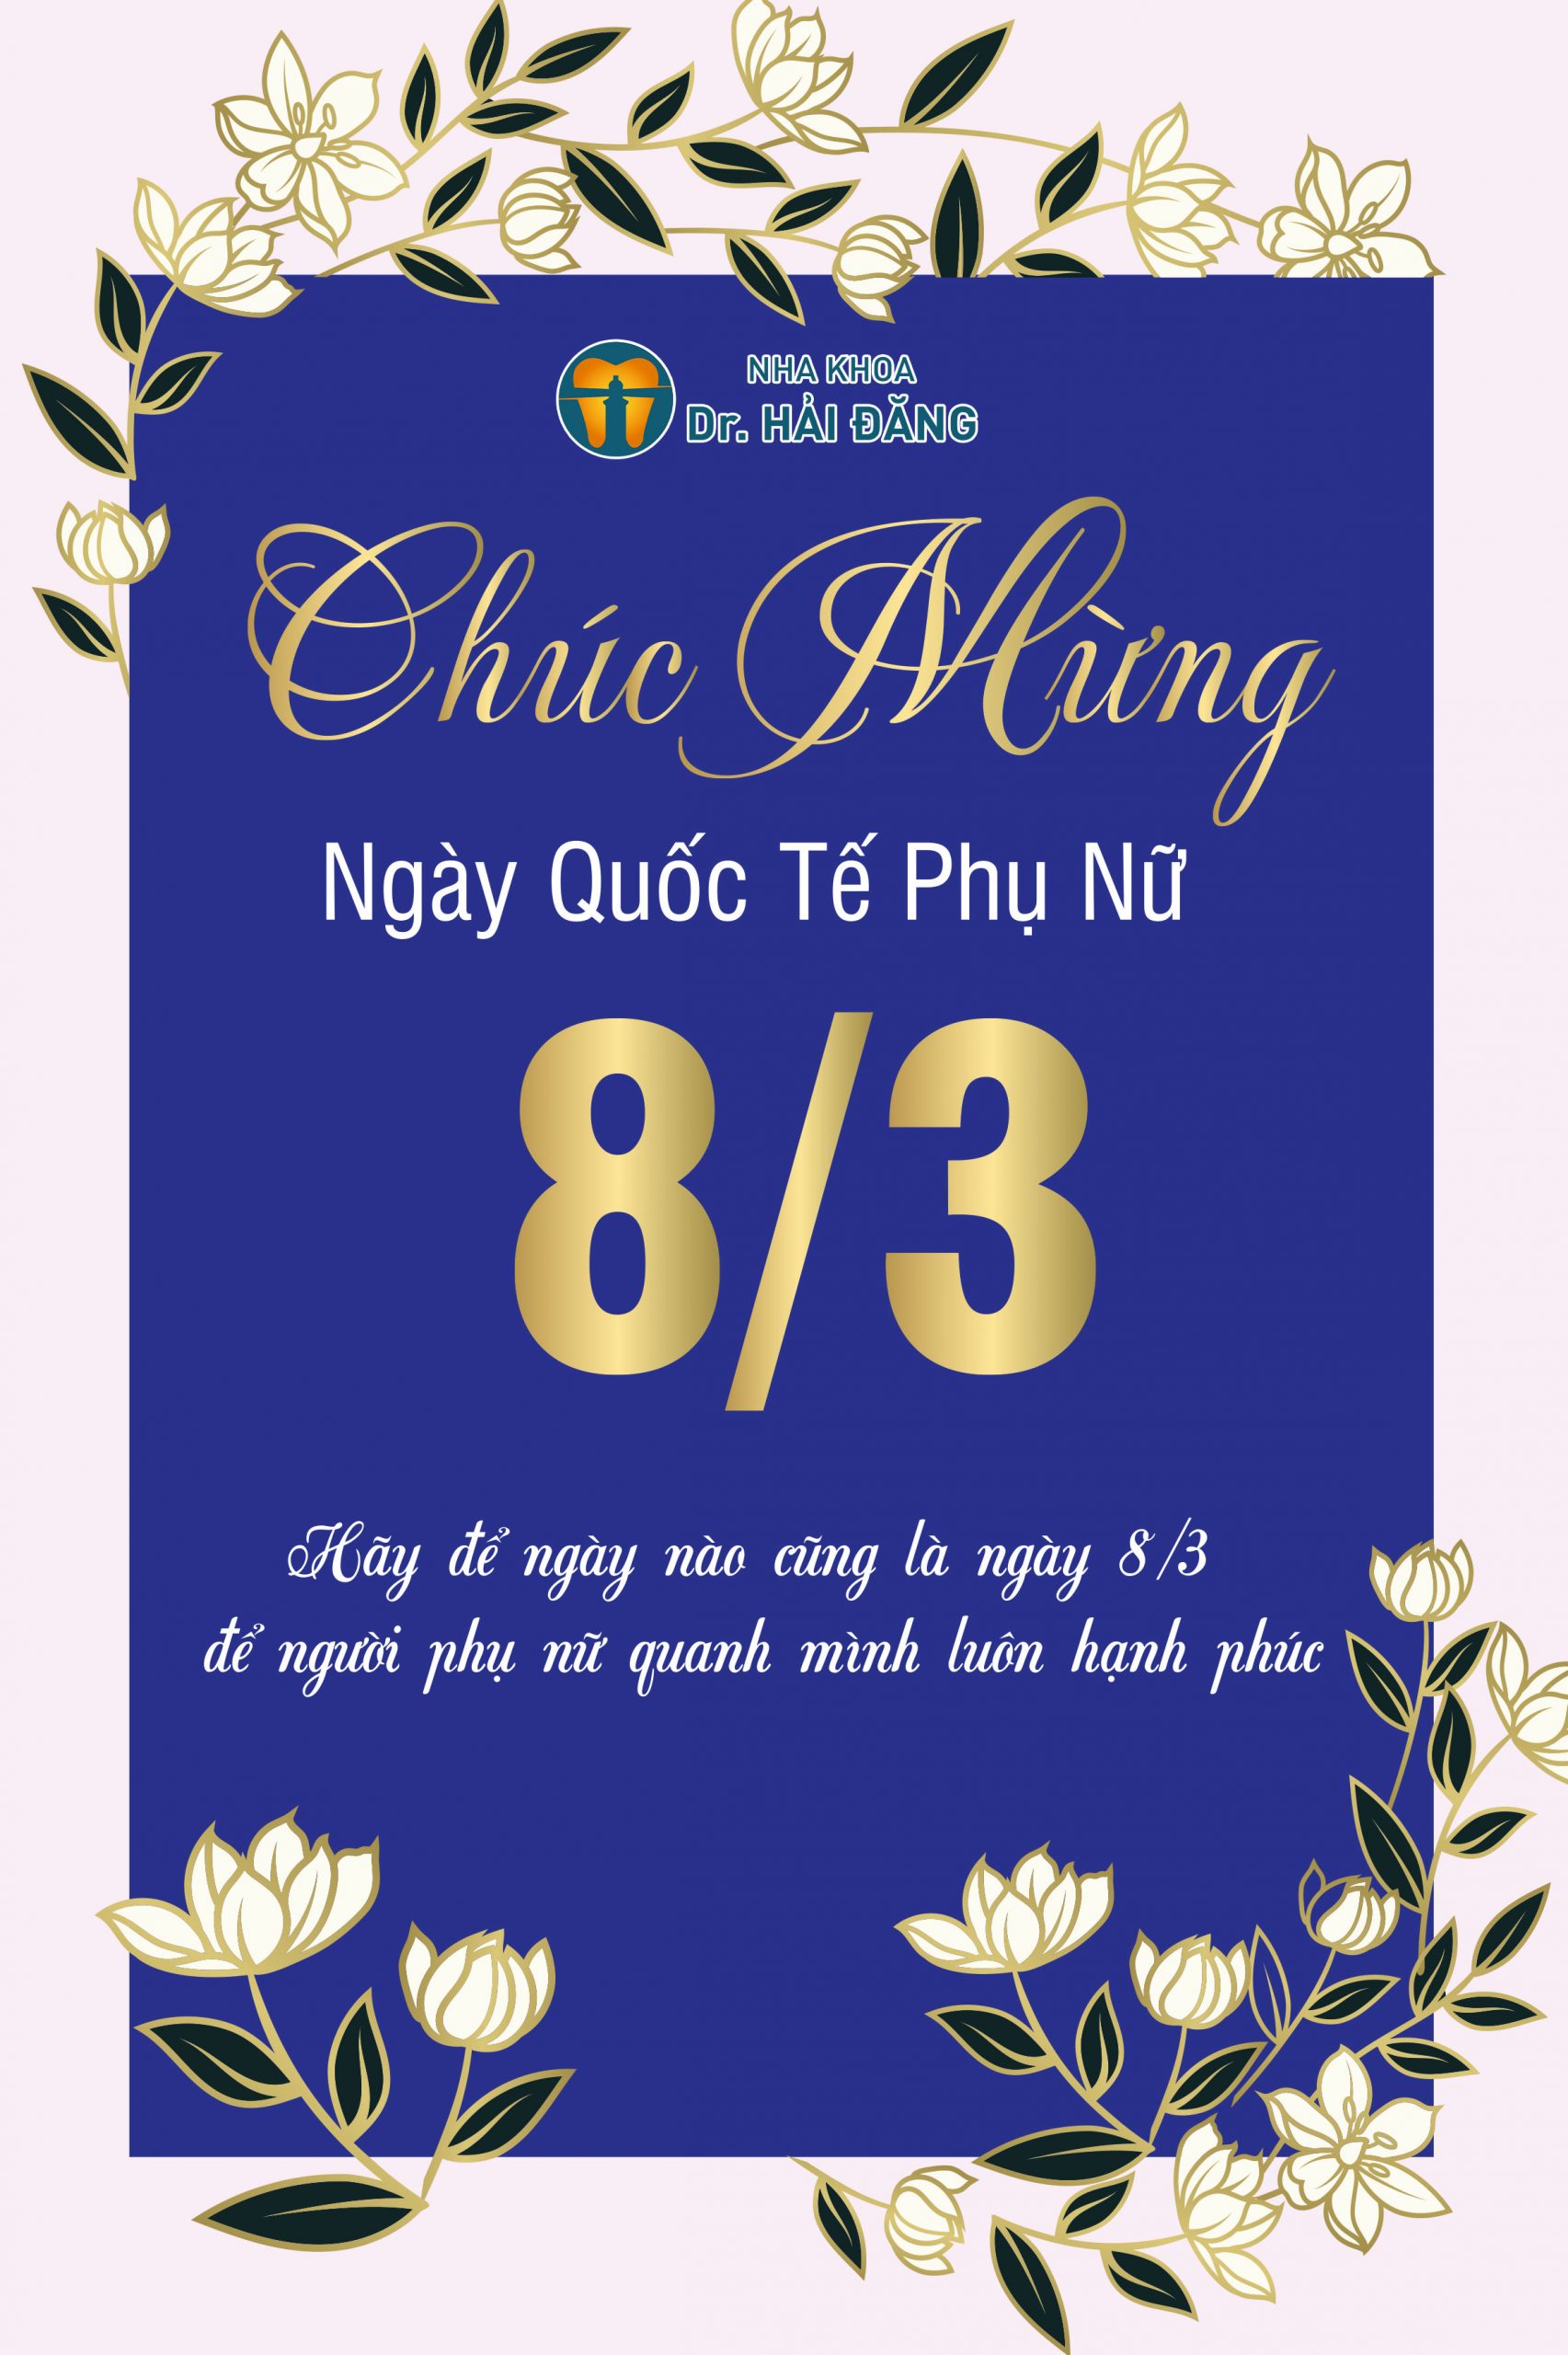 Read more about the article Chúc mừng ngày Quốc tế Phụ nữ 8/3